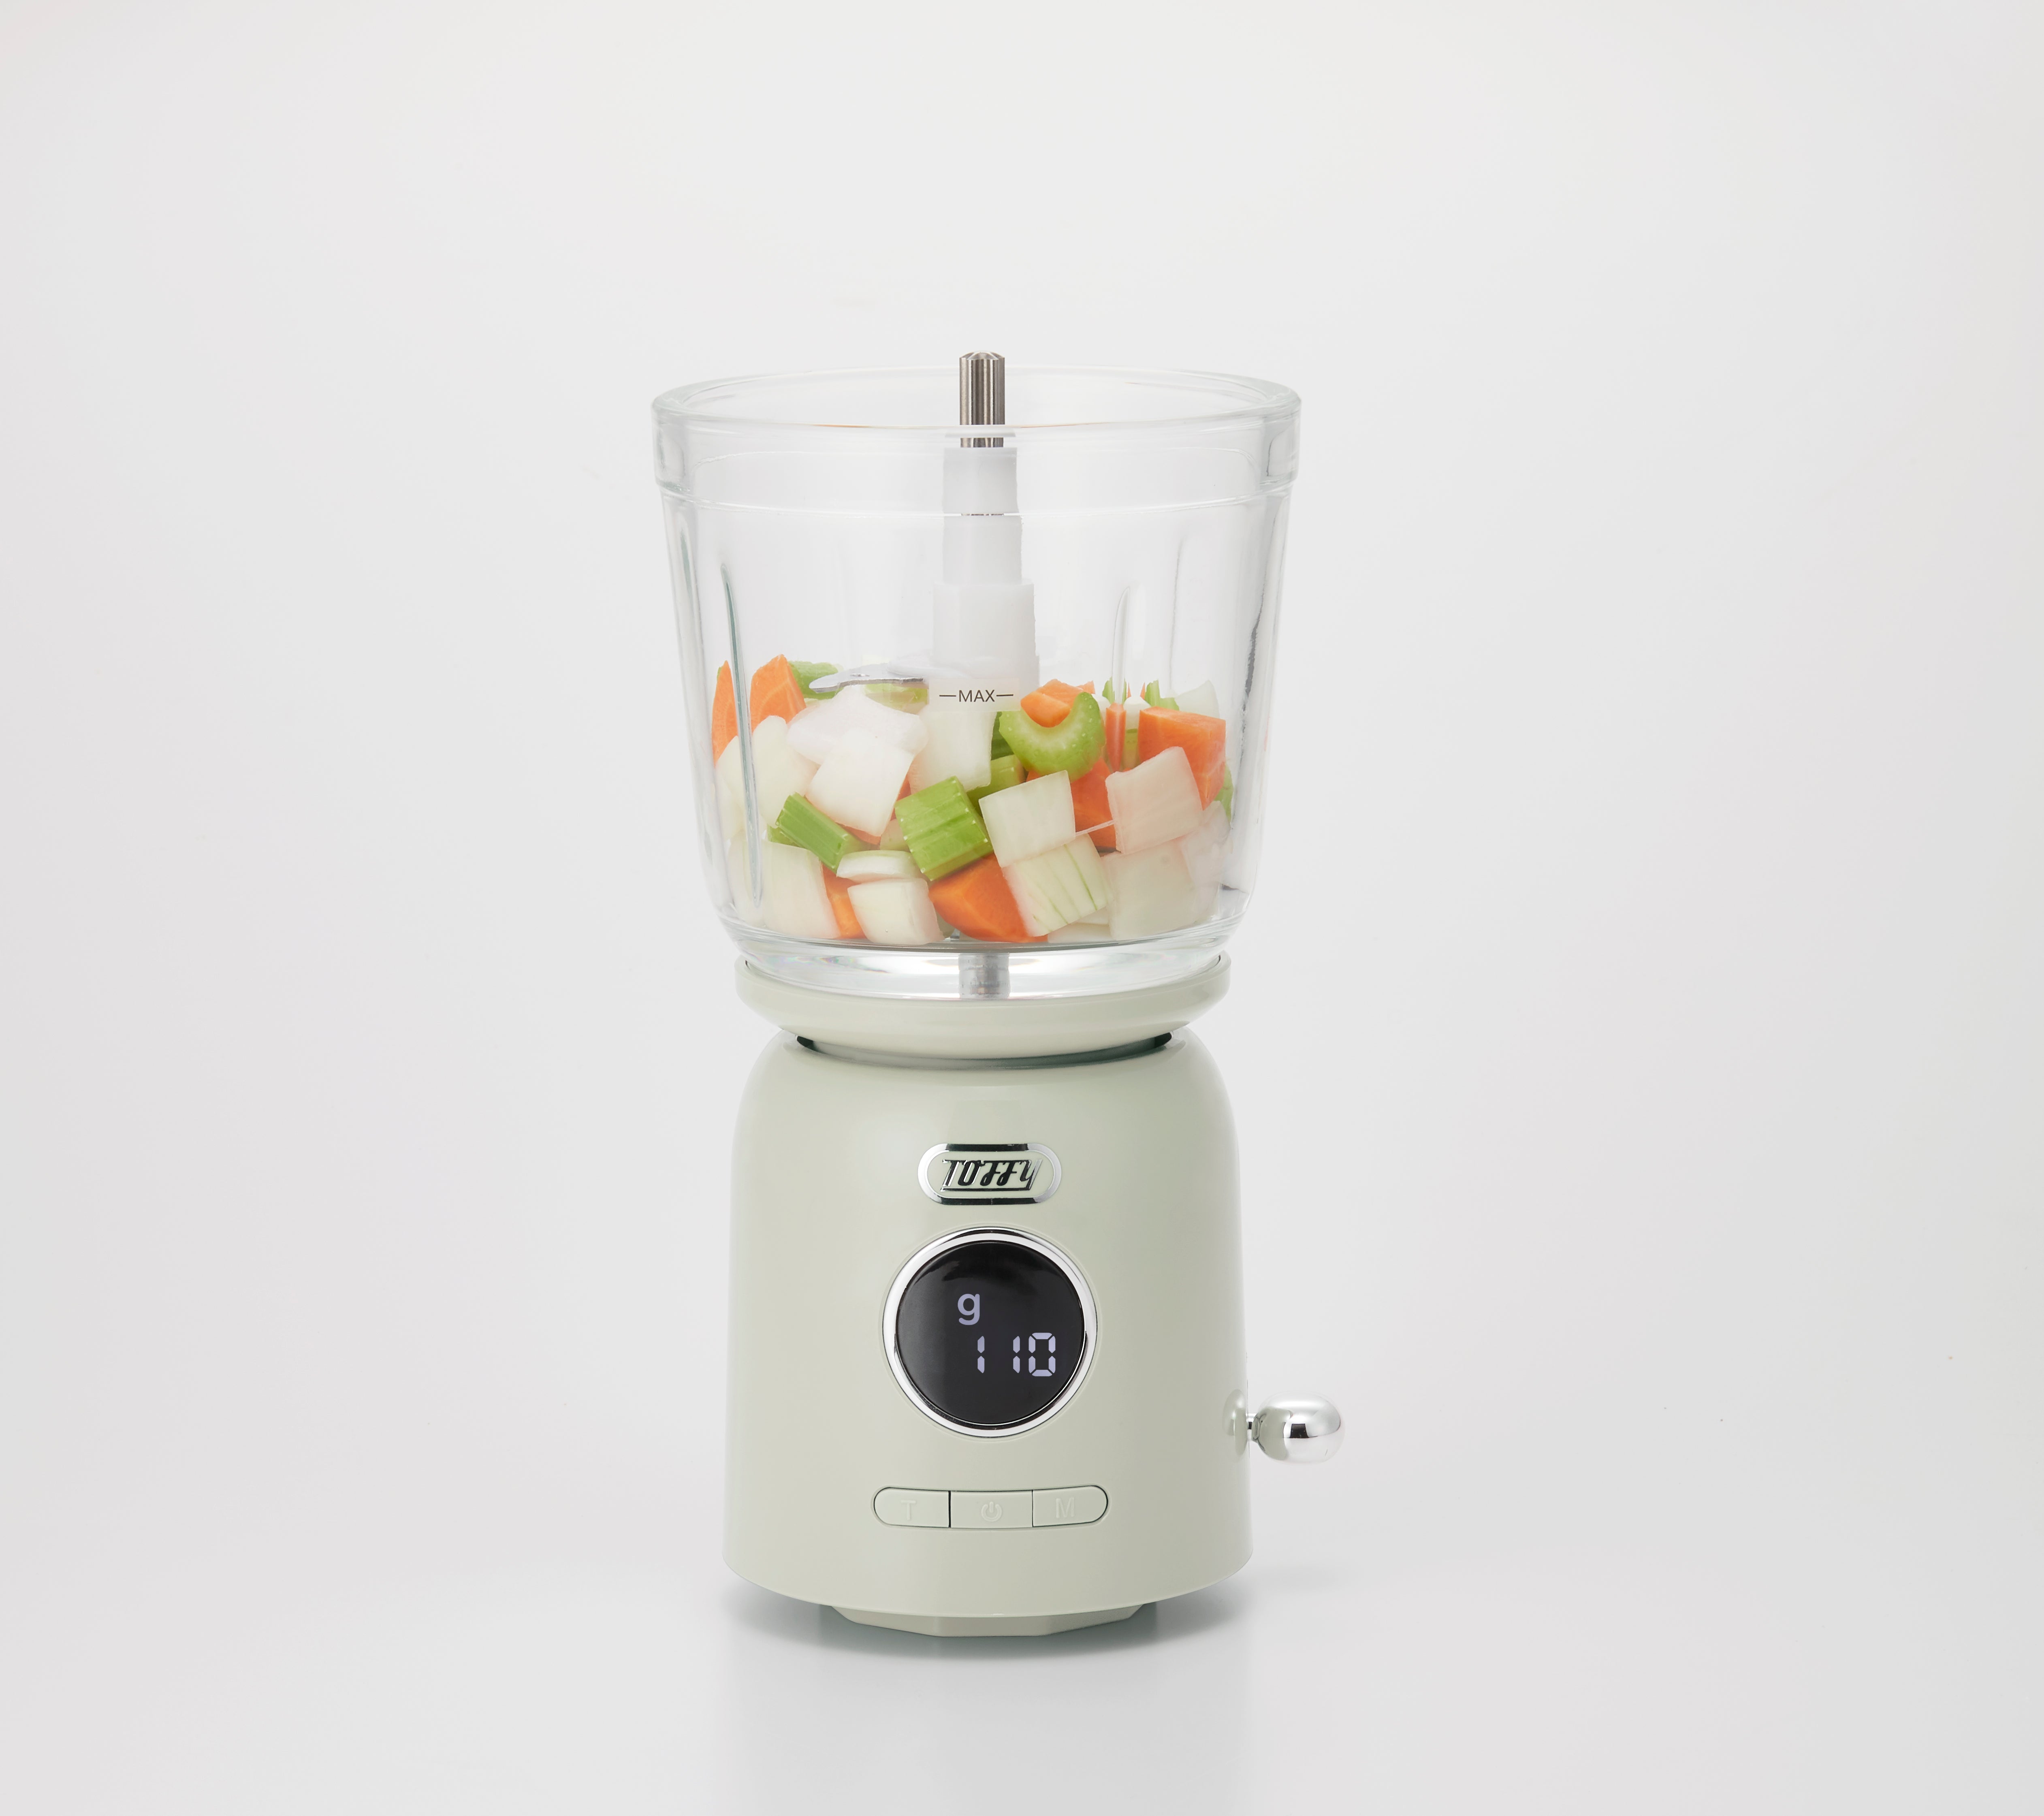 Toffy Rechargeable Weigh + Multi Food Processor 多功能無線秤重食物料理機 K-CH2-PA/ K-CH2-AW